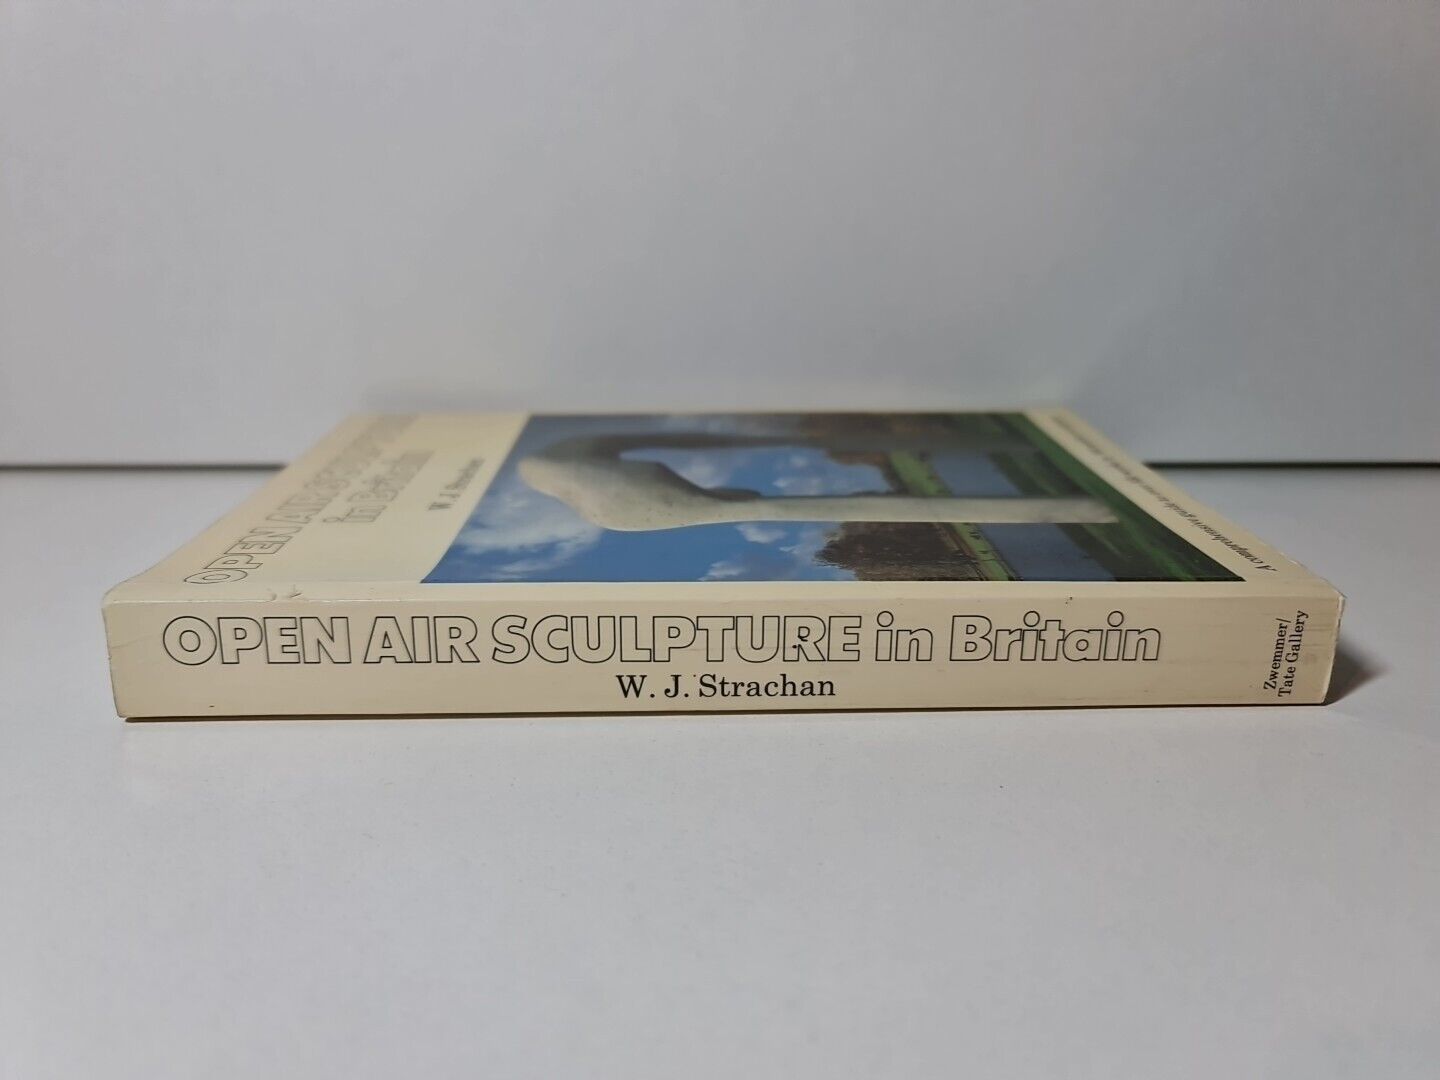 Open Air Sculpture in Britain: A Comprehensive Guide by W.J. Strachan (1984)